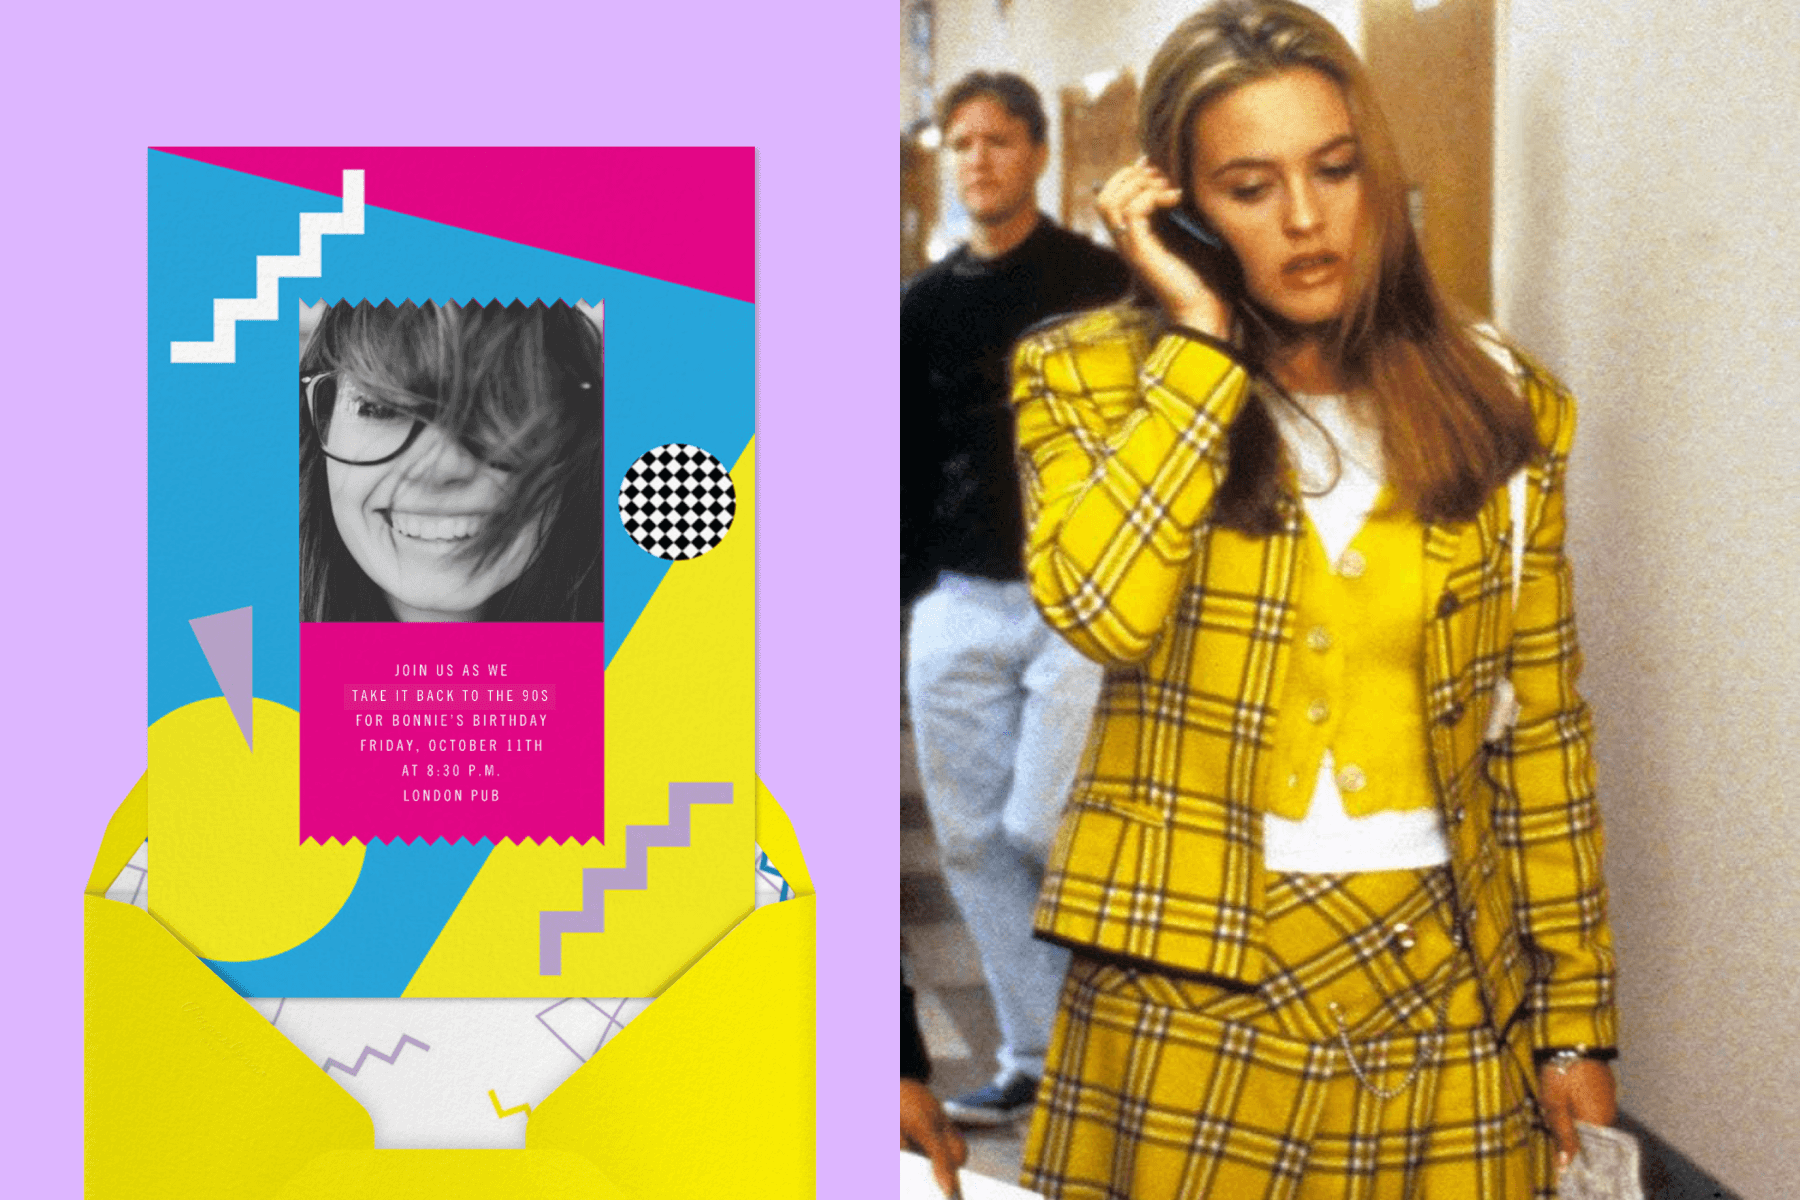 Alt text, left: An invitation with neon colored Memphis-style abstract shapes and a photo of a woman in the center. Right: Alicia Silverstone as Cher in “Clueless” wearing a yellow tartan outfit.